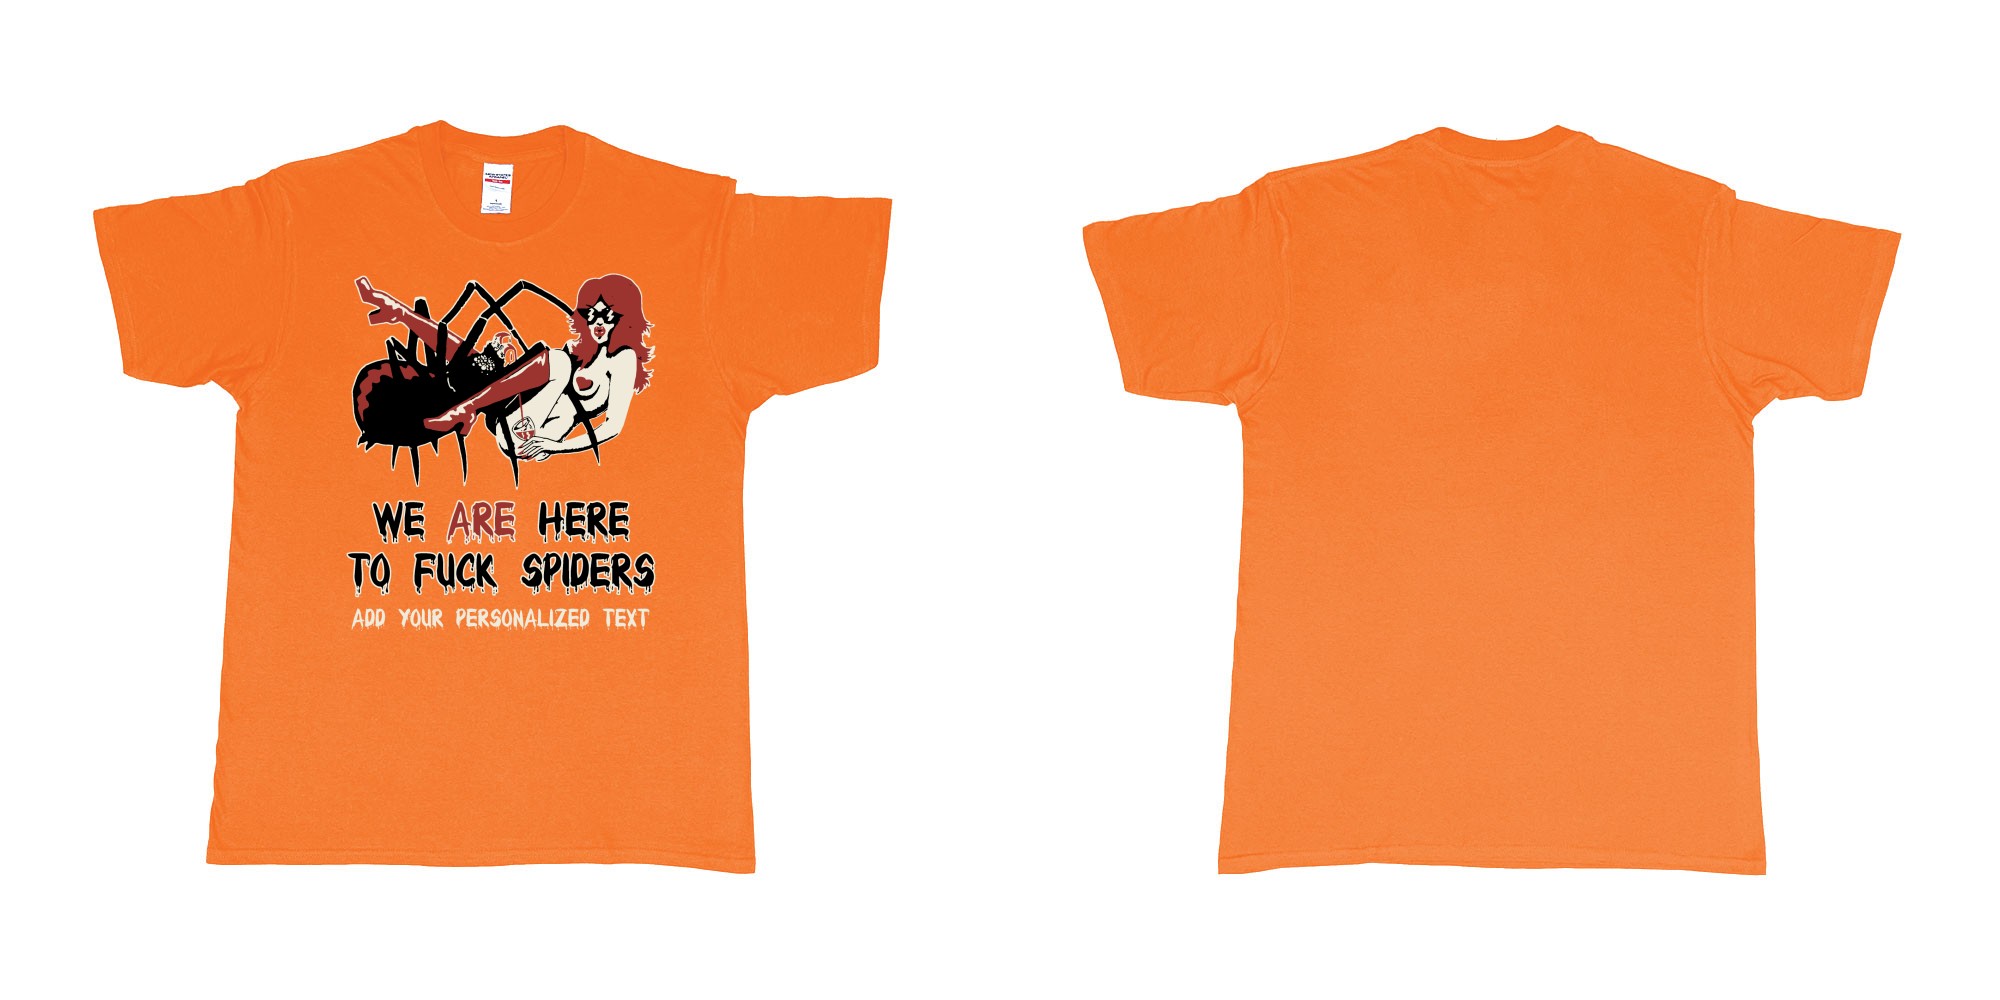 Custom tshirt design we are here to fuck spiders in fabric color orange choice your own text made in Bali by The Pirate Way